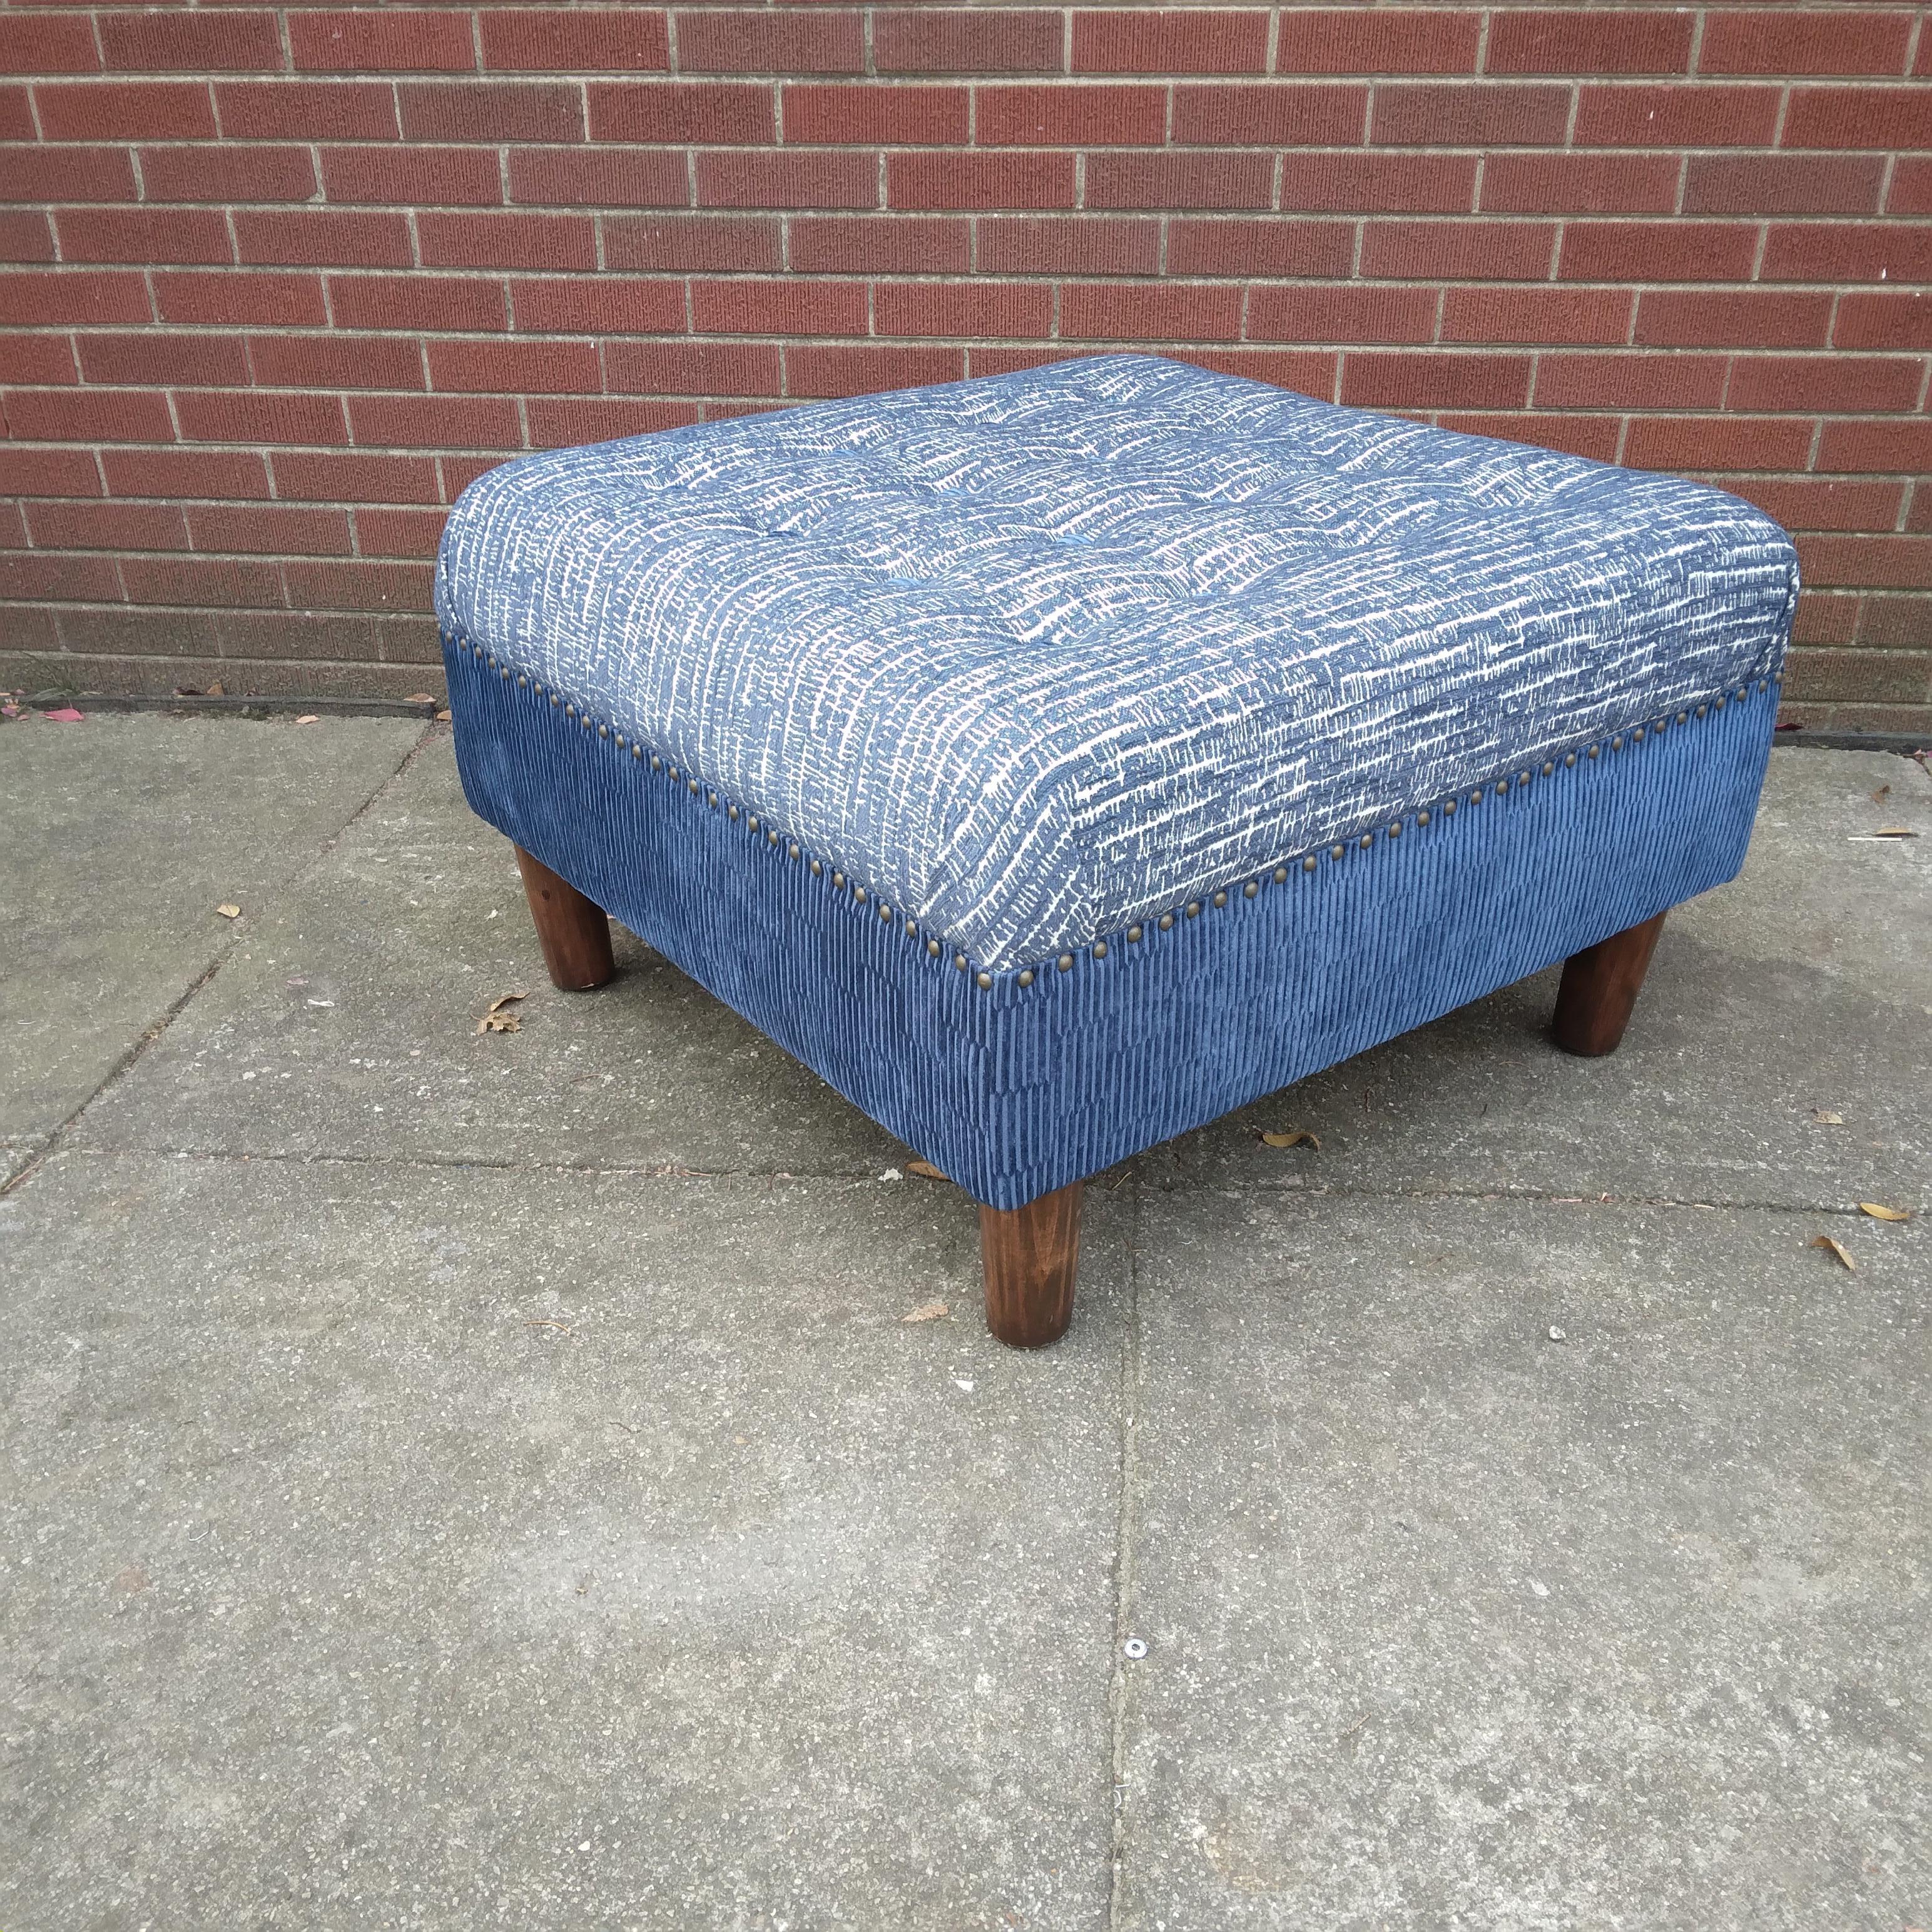 A profusion of blue in lush textures… this one-of-a-kind ottoman is the perfect centerpiece. The top fabric, Woodland II in Blue Spruce by Knoll, is stunning. The organic looking pattern features a light texture and a wonderful contrast between the